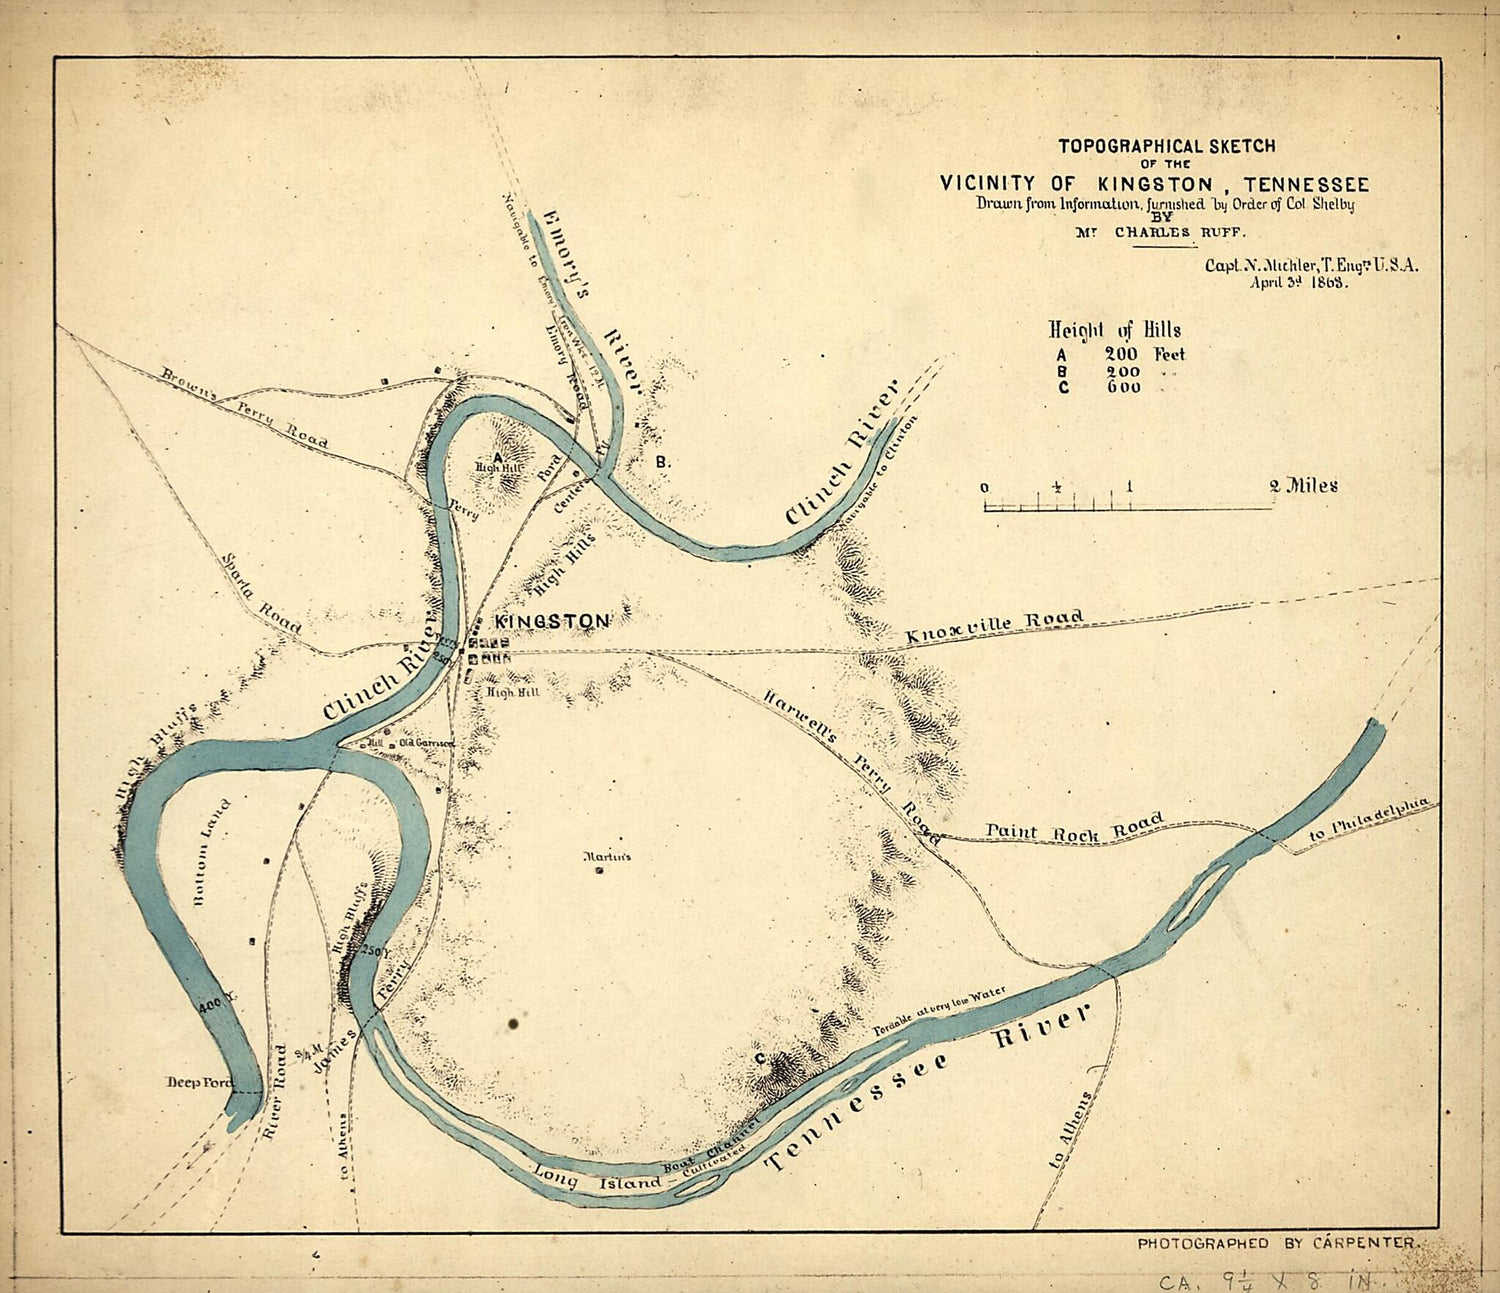 This old map of Topographical Sketch of the Vicinity of Kingston, Tennessee from 1863 was created by N. (Nathaniel) Michler in 1863